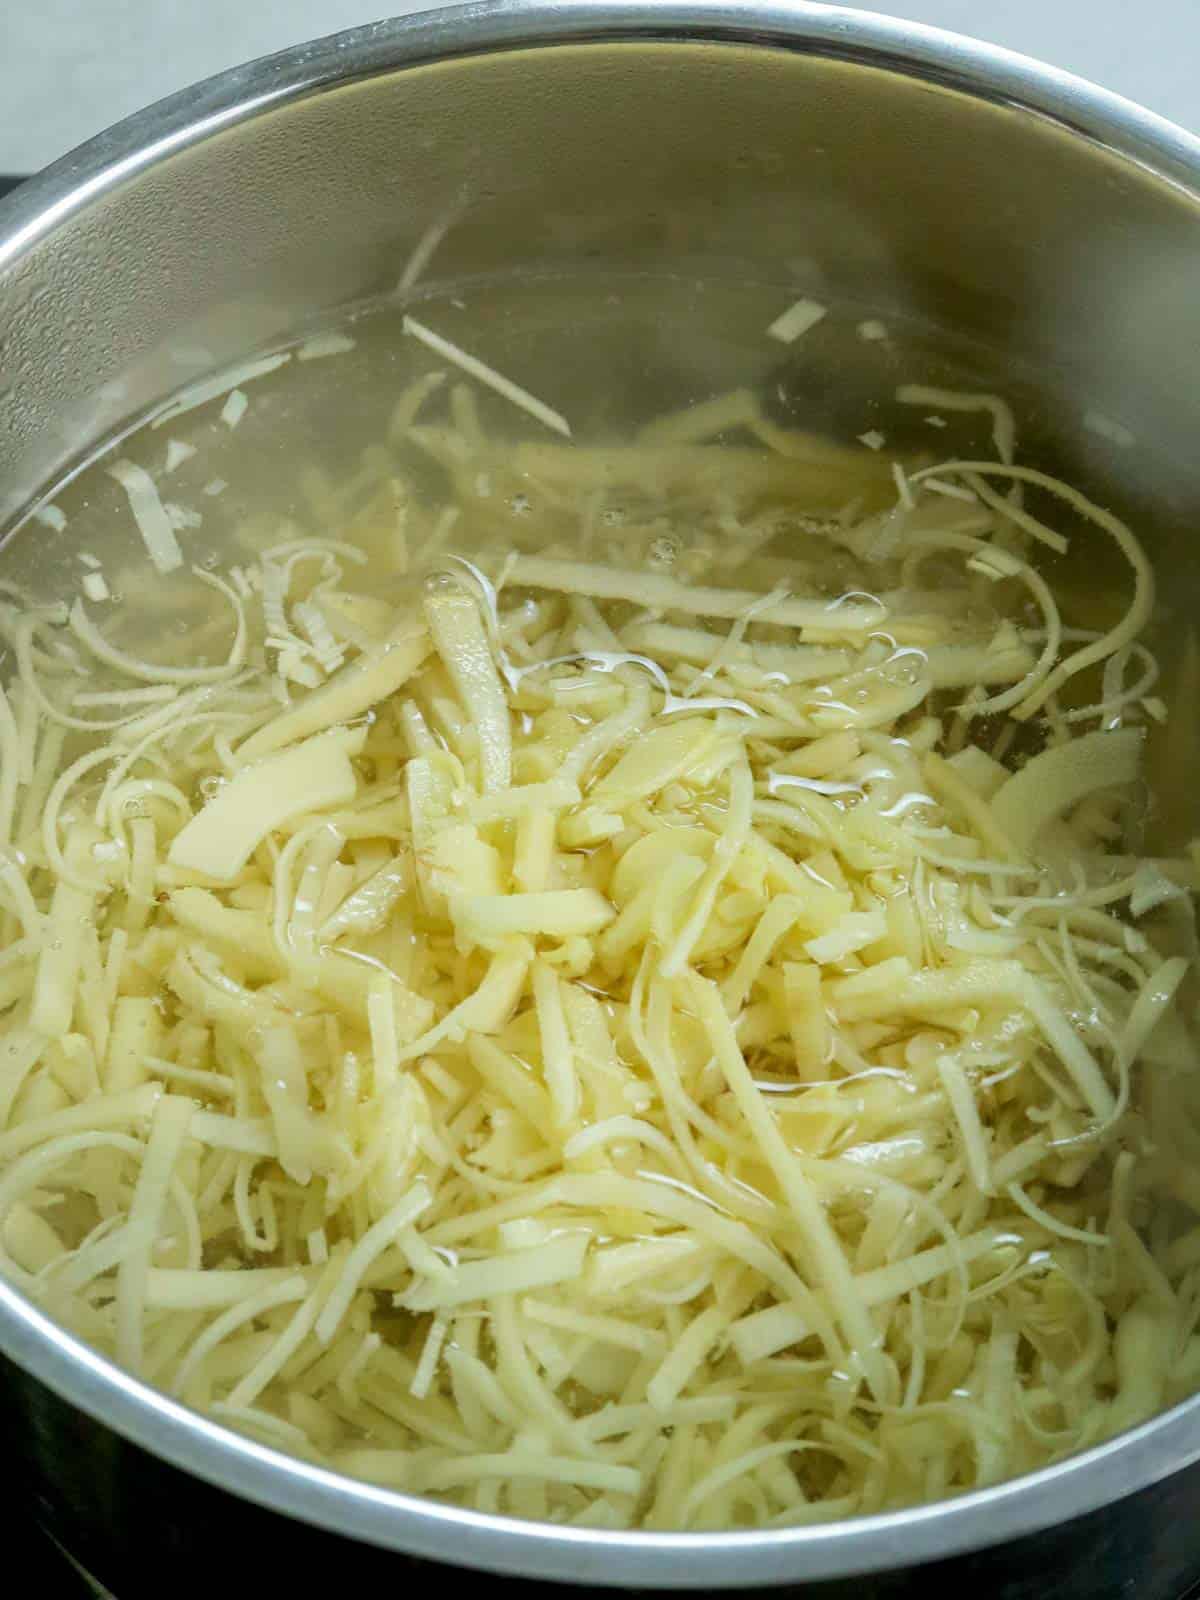 boiling young bamboo shoots in a pot of water.